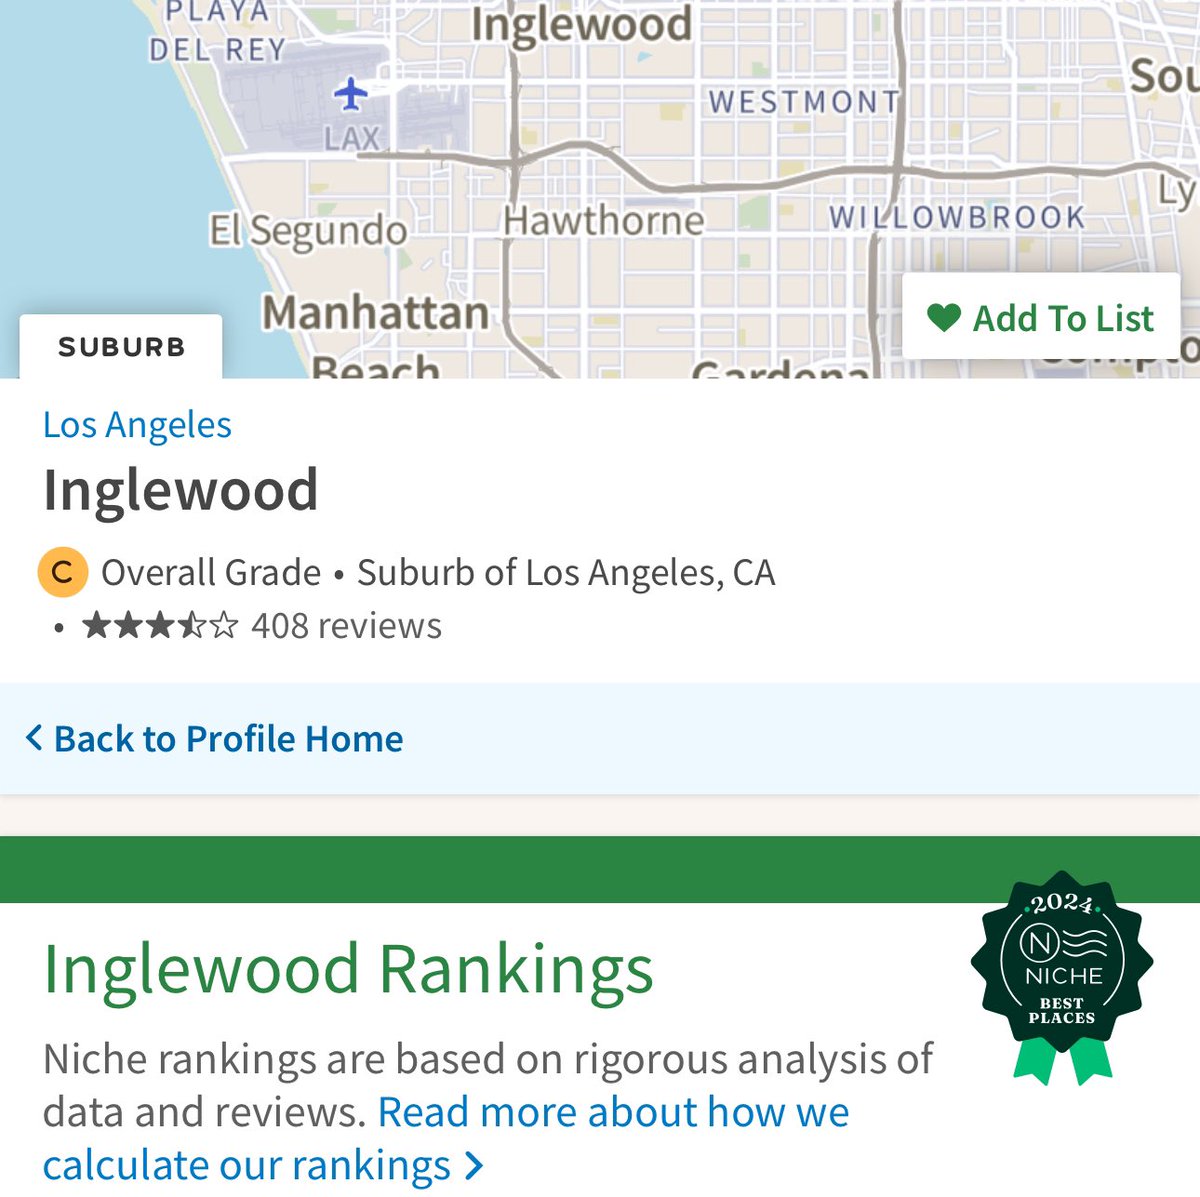 #WestAthens overall grading compared to #SouthGate & #Inglewood & #Compton